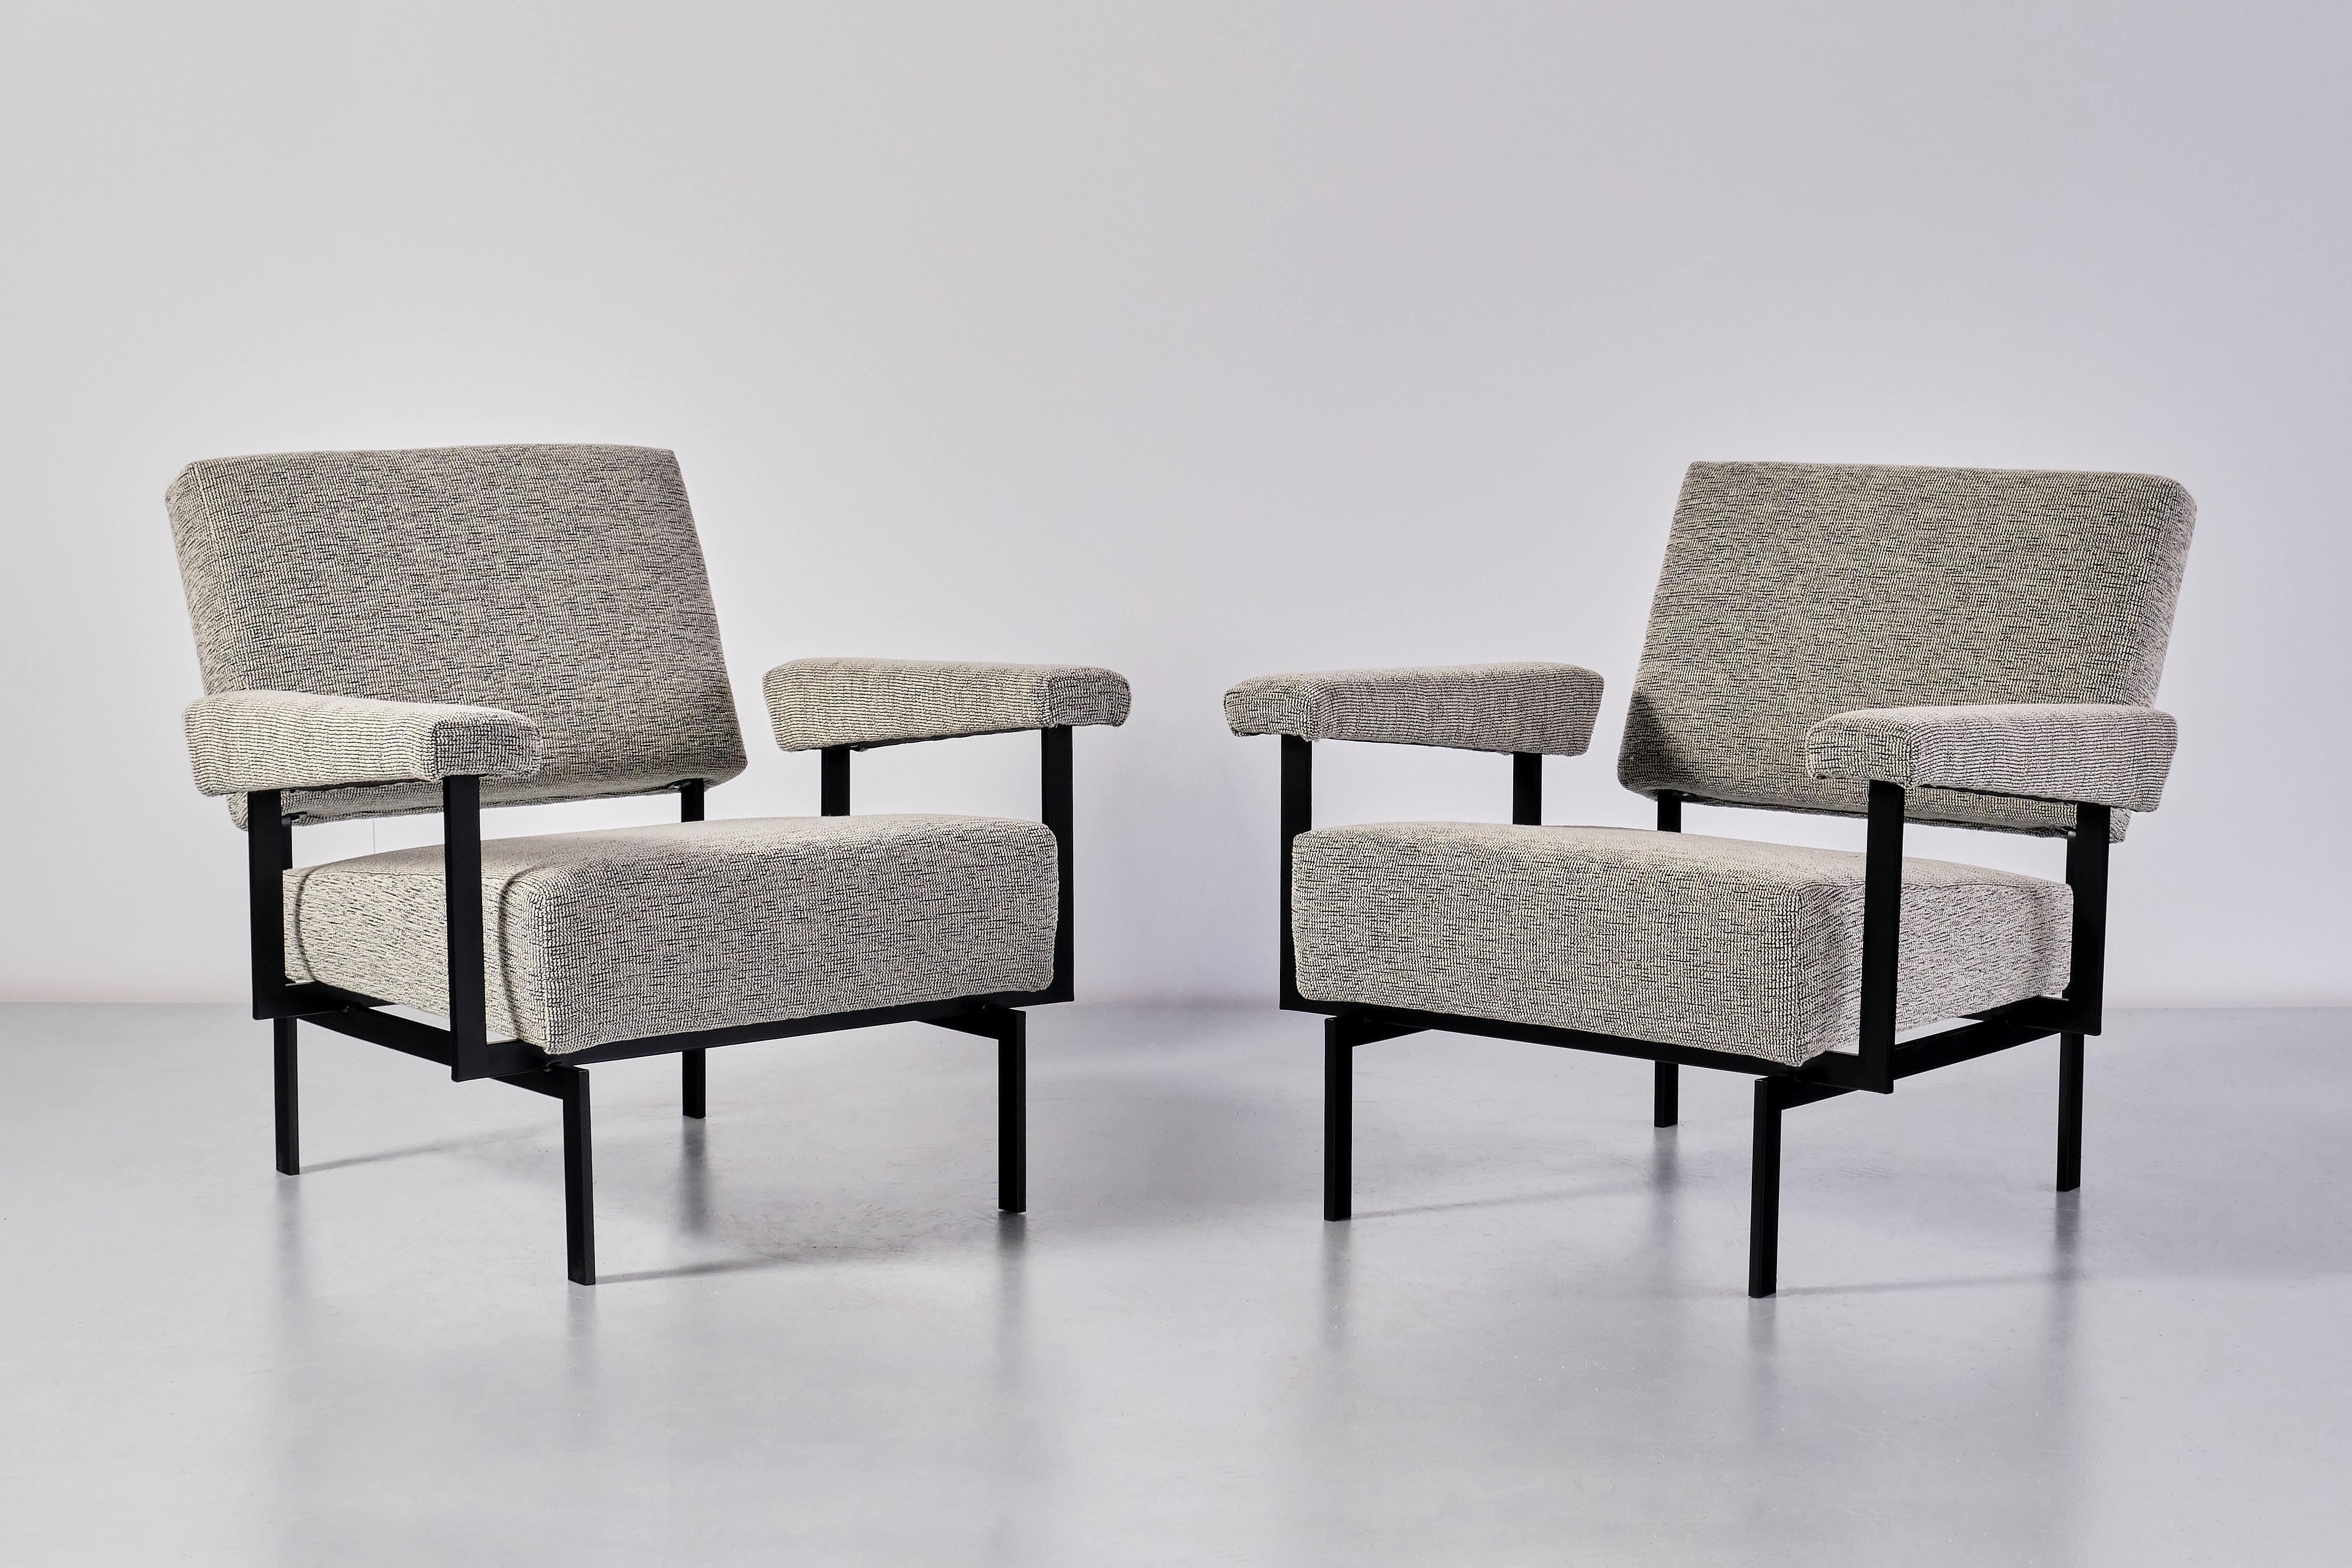 This rare pair of armchairs was designed by Cees Braakman and produced by Pastoe in The Netherlands, circa 1958. This striking model was numbered FM07 and is part of the iconic Japanese series designed by Braakman. 

The design is marked by the